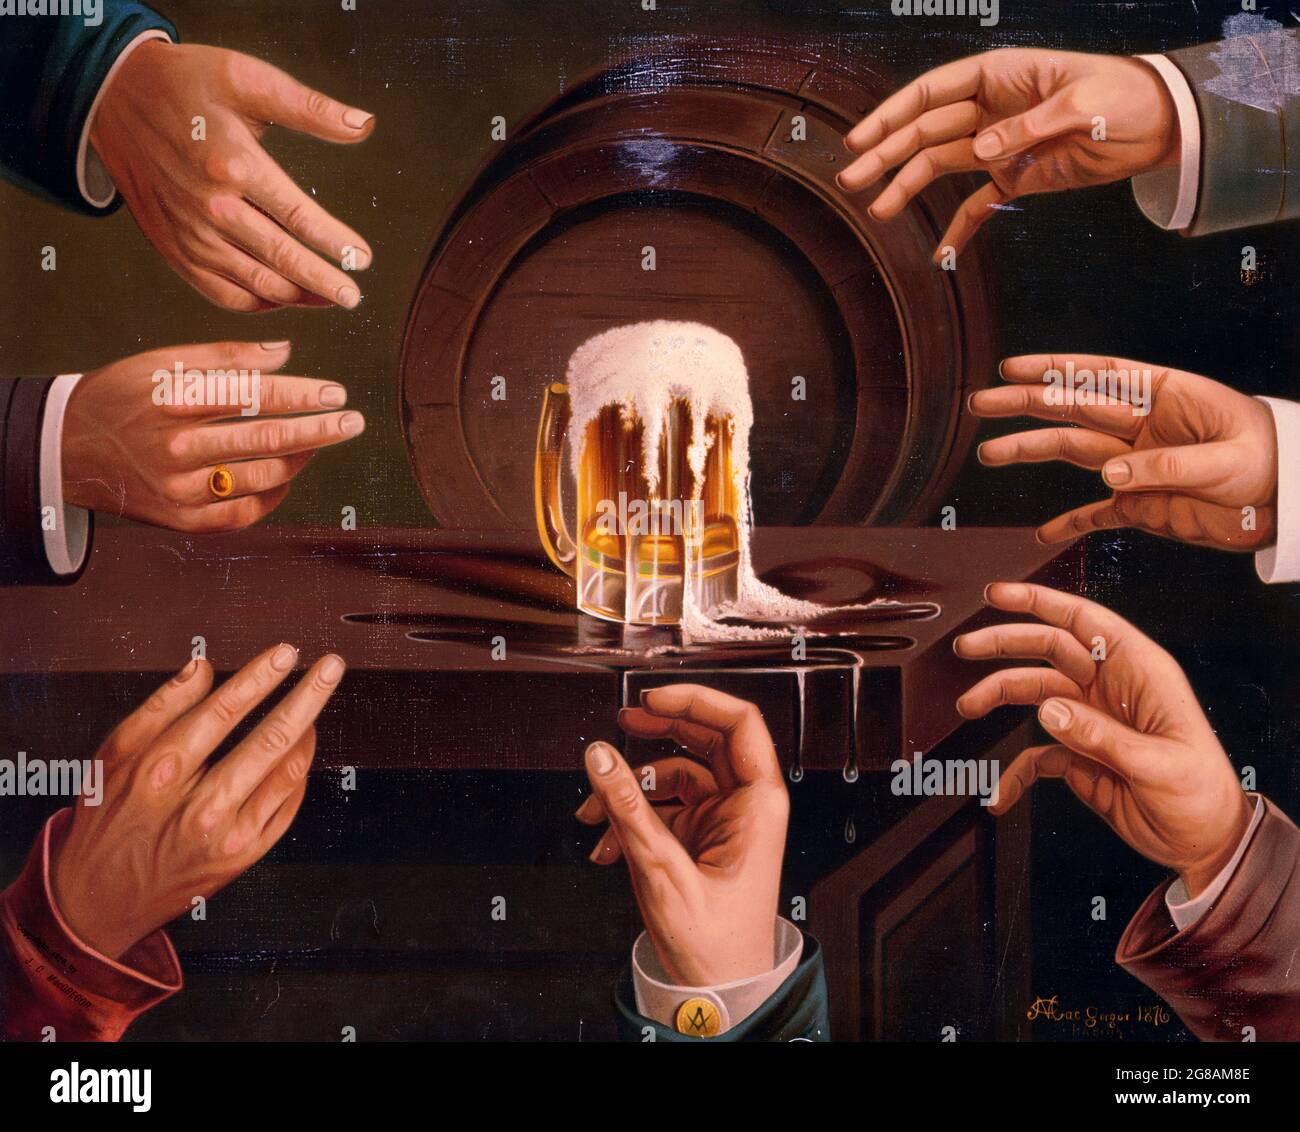 Vintage advertisement for beer. 1876. Seven male hands reaching for a mug of beer, sitting on a table. (Probably for the brewery Anheuser-Busch.) Stock Photo